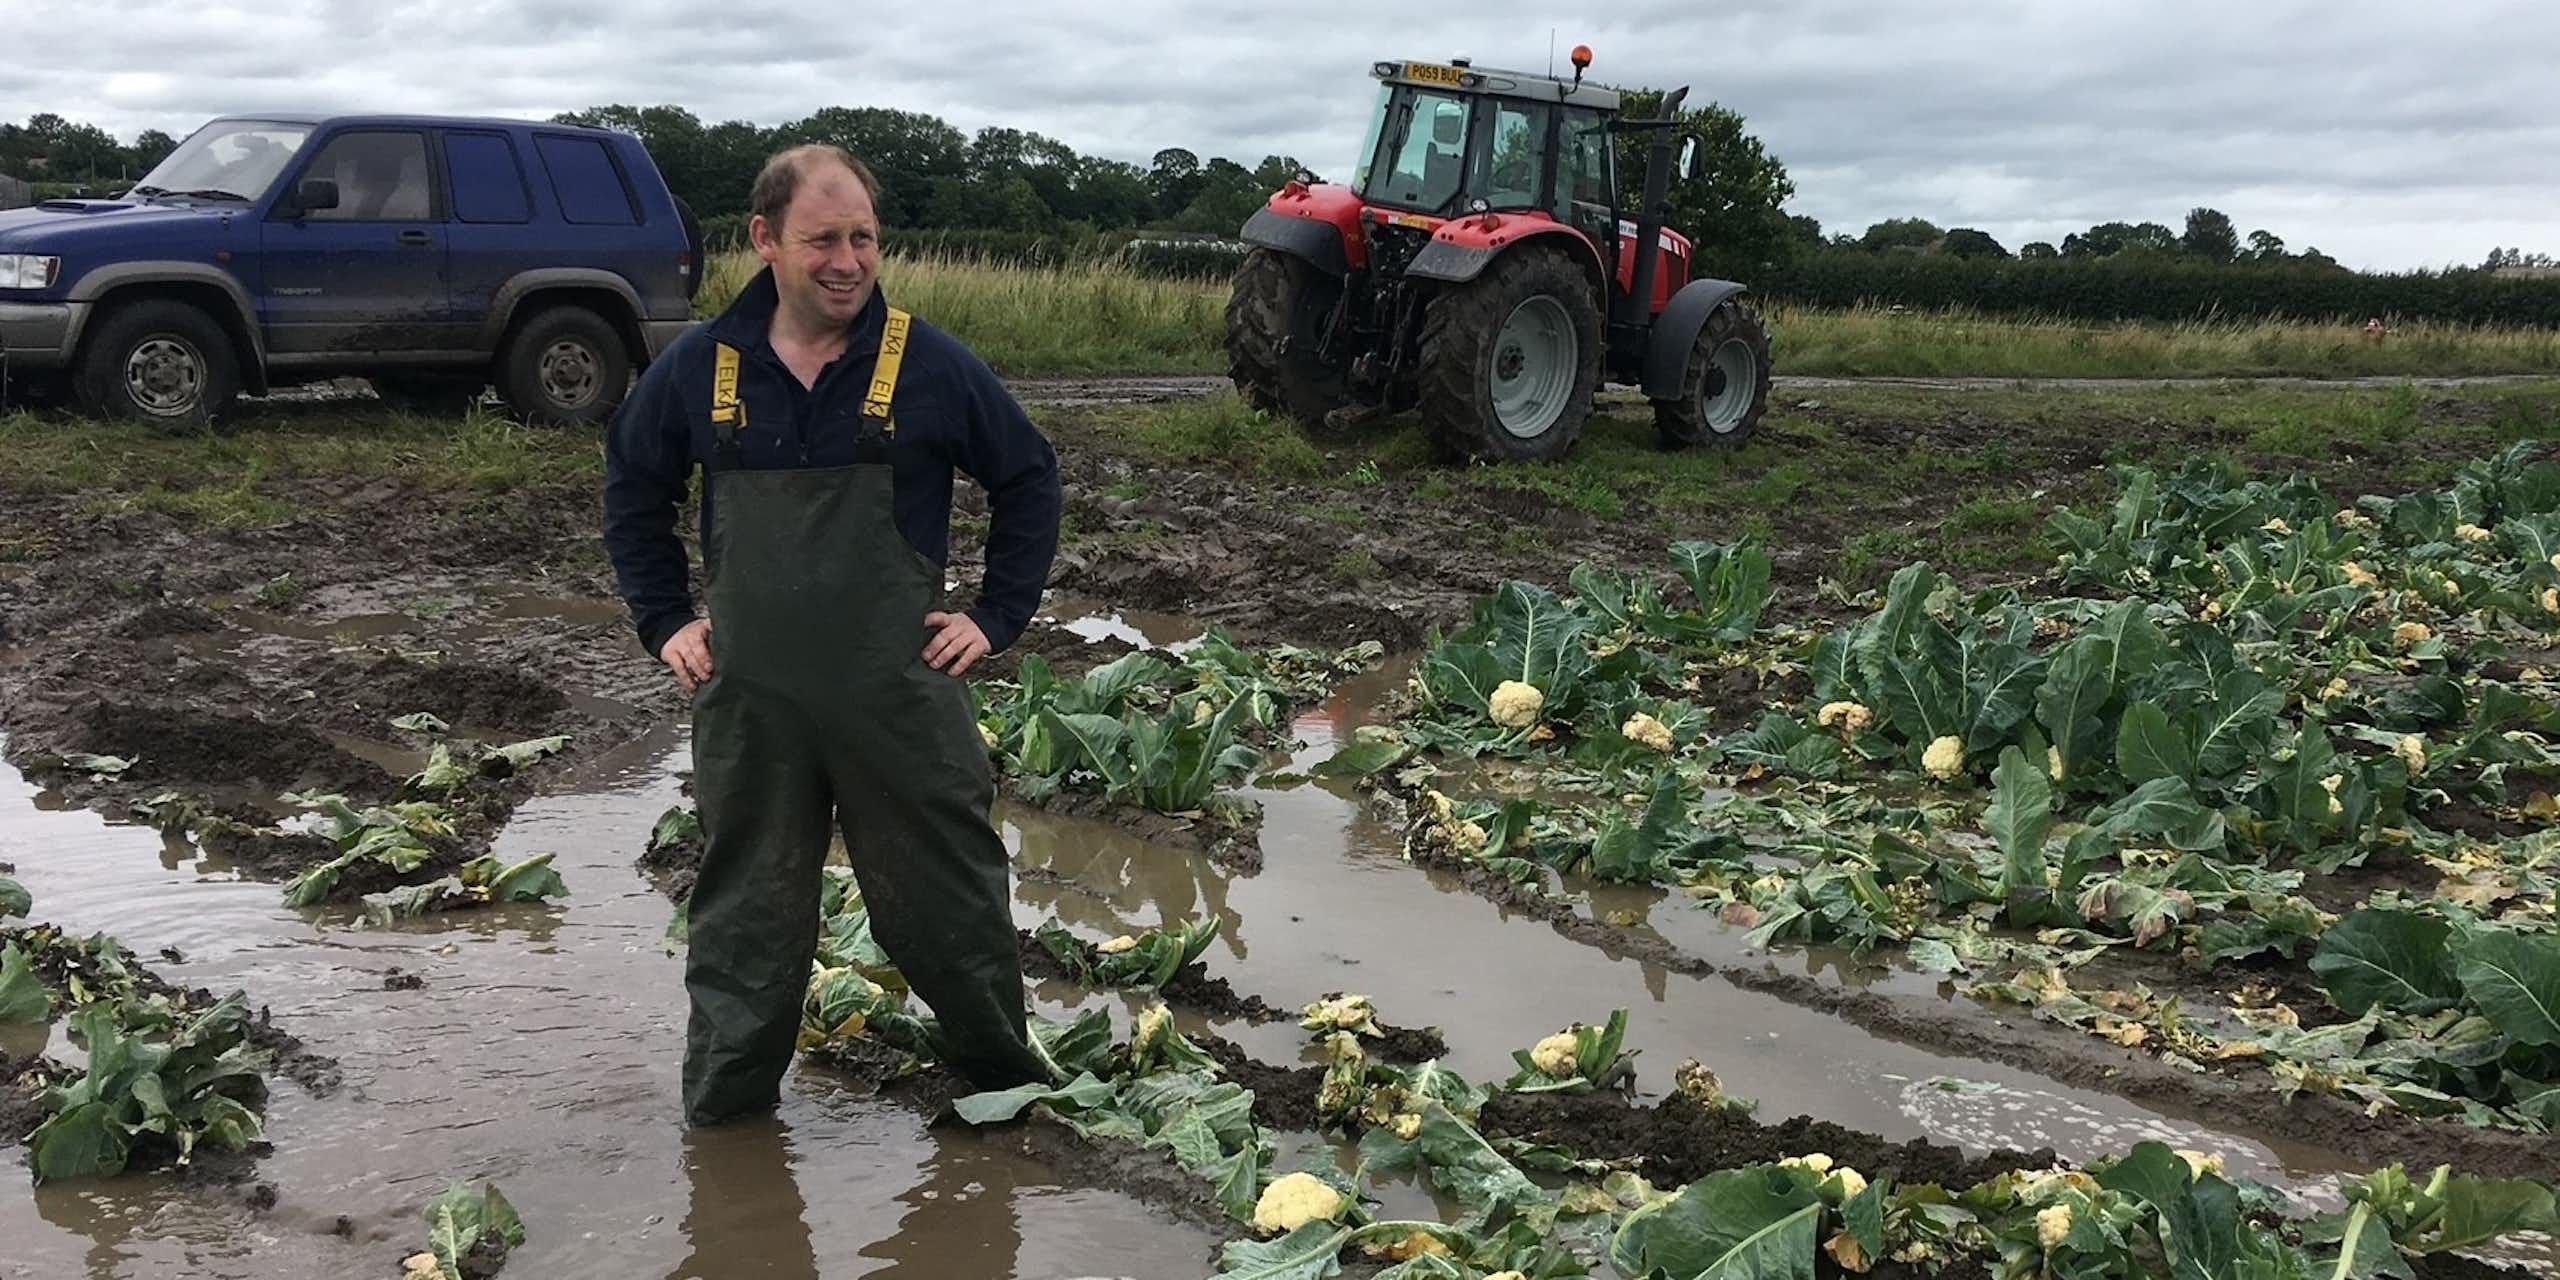 A farmer stands in muddy water that has inundated a farm field.